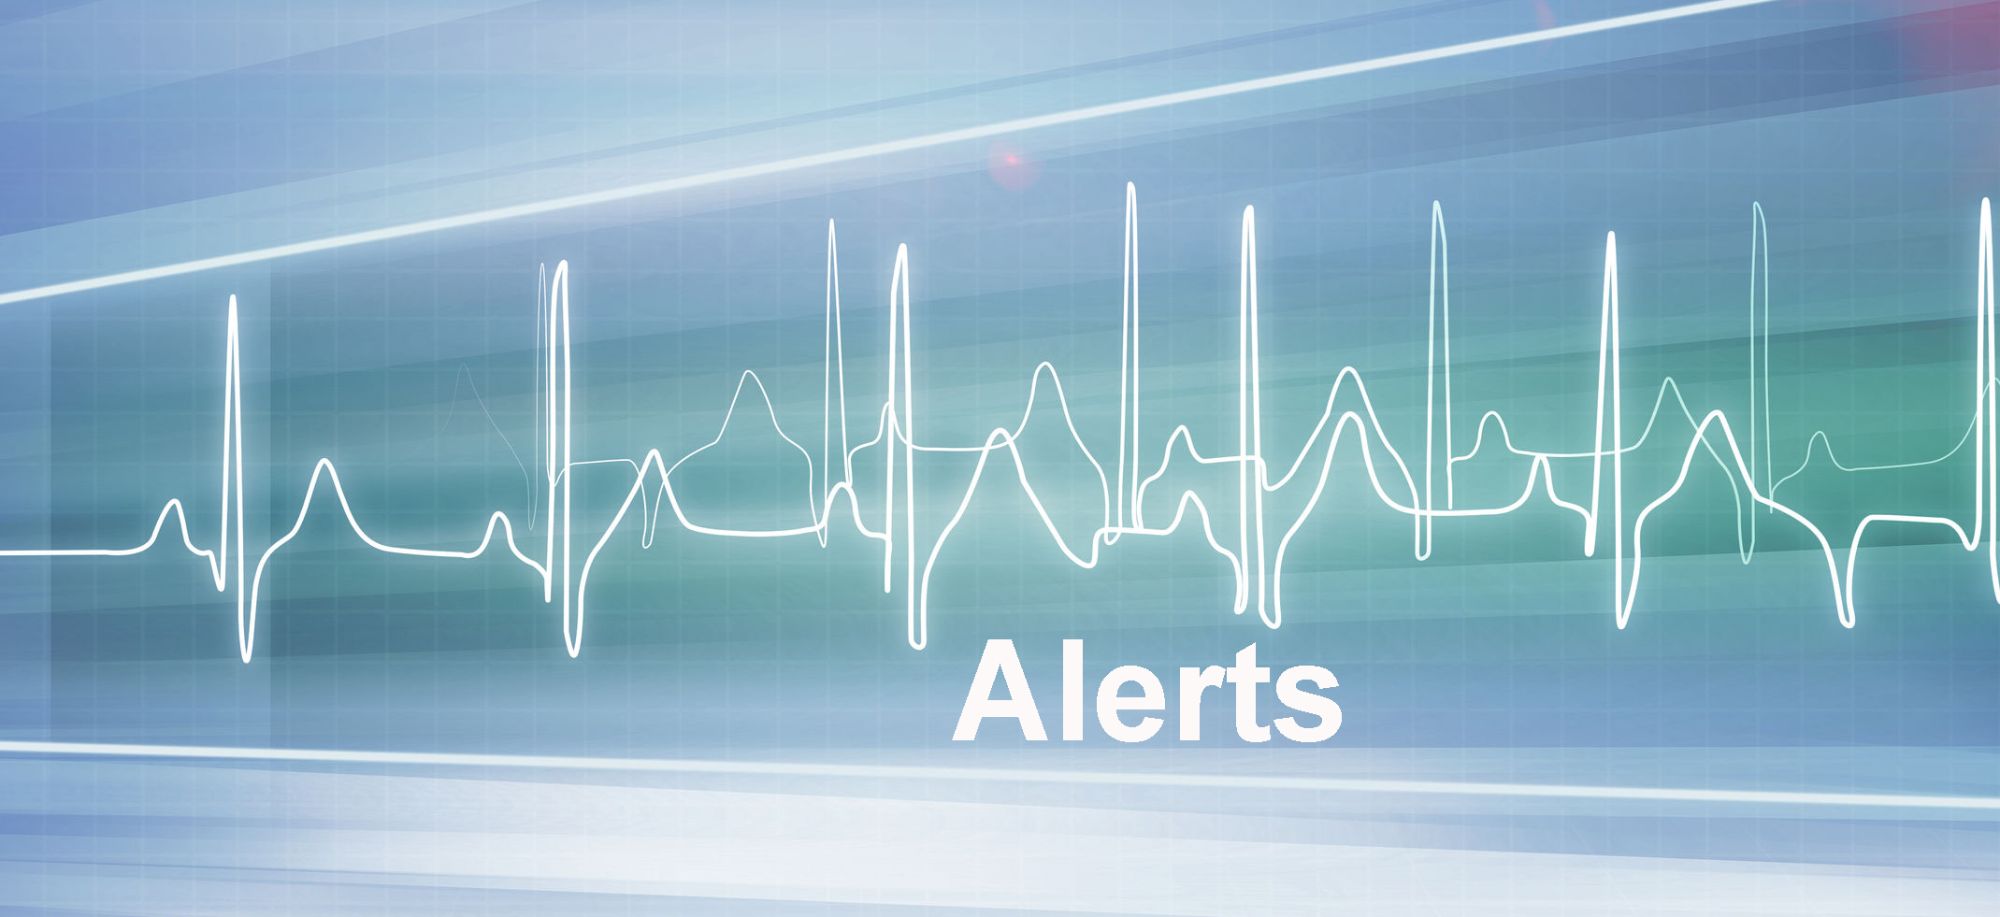 Slide Image. Vector  iamge of a heart trace with the word "Alert" displayed prominently